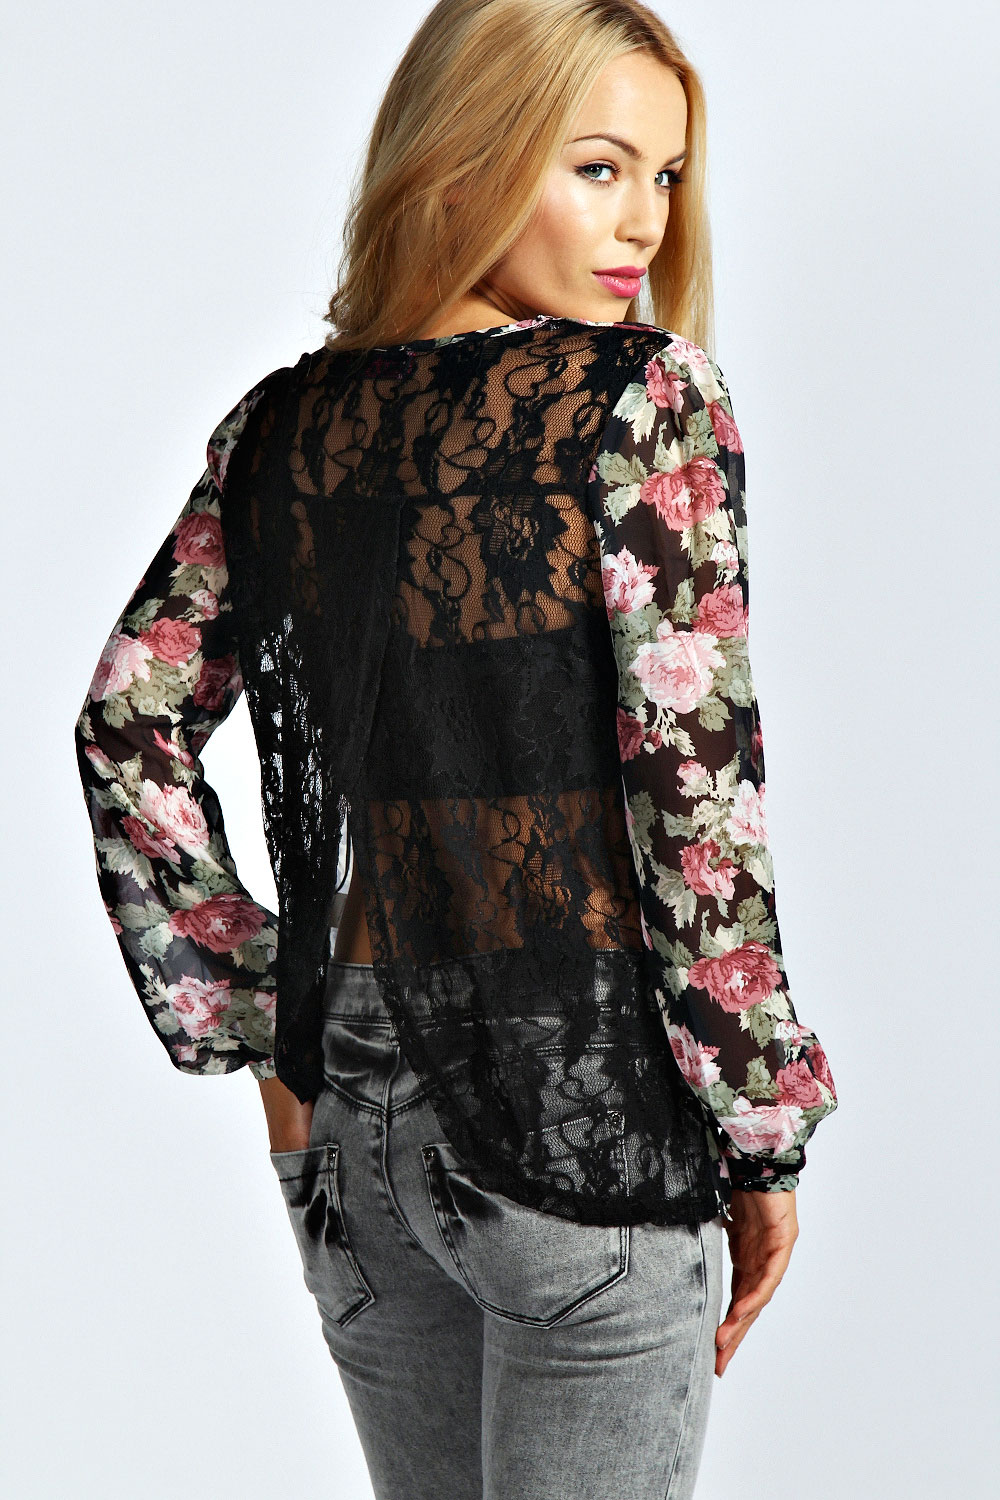 boohoo Mia Floral Print Open Back Lace Blouse -